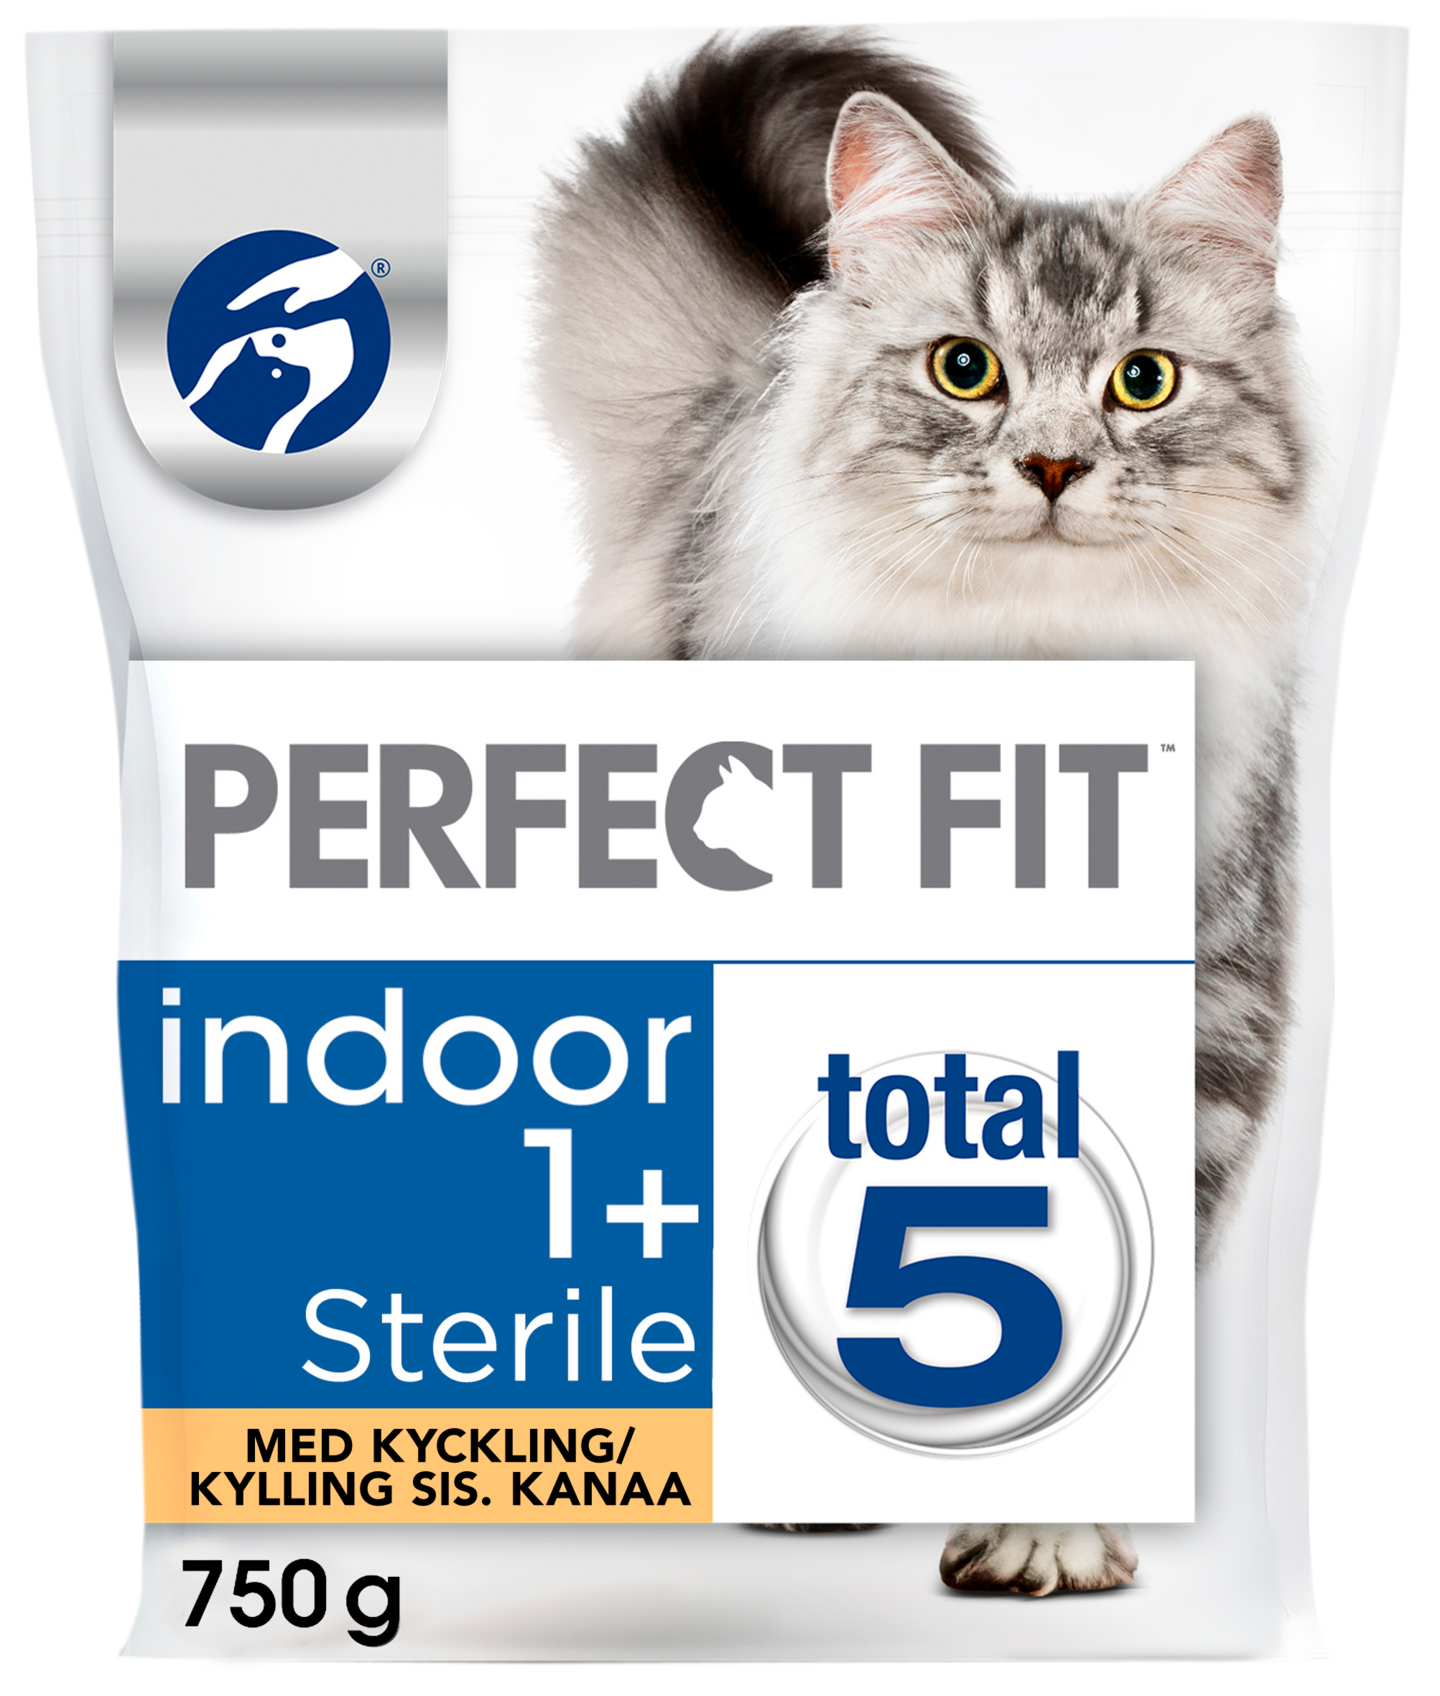 Perfect Fit 750g Indoor Sterile kanaa